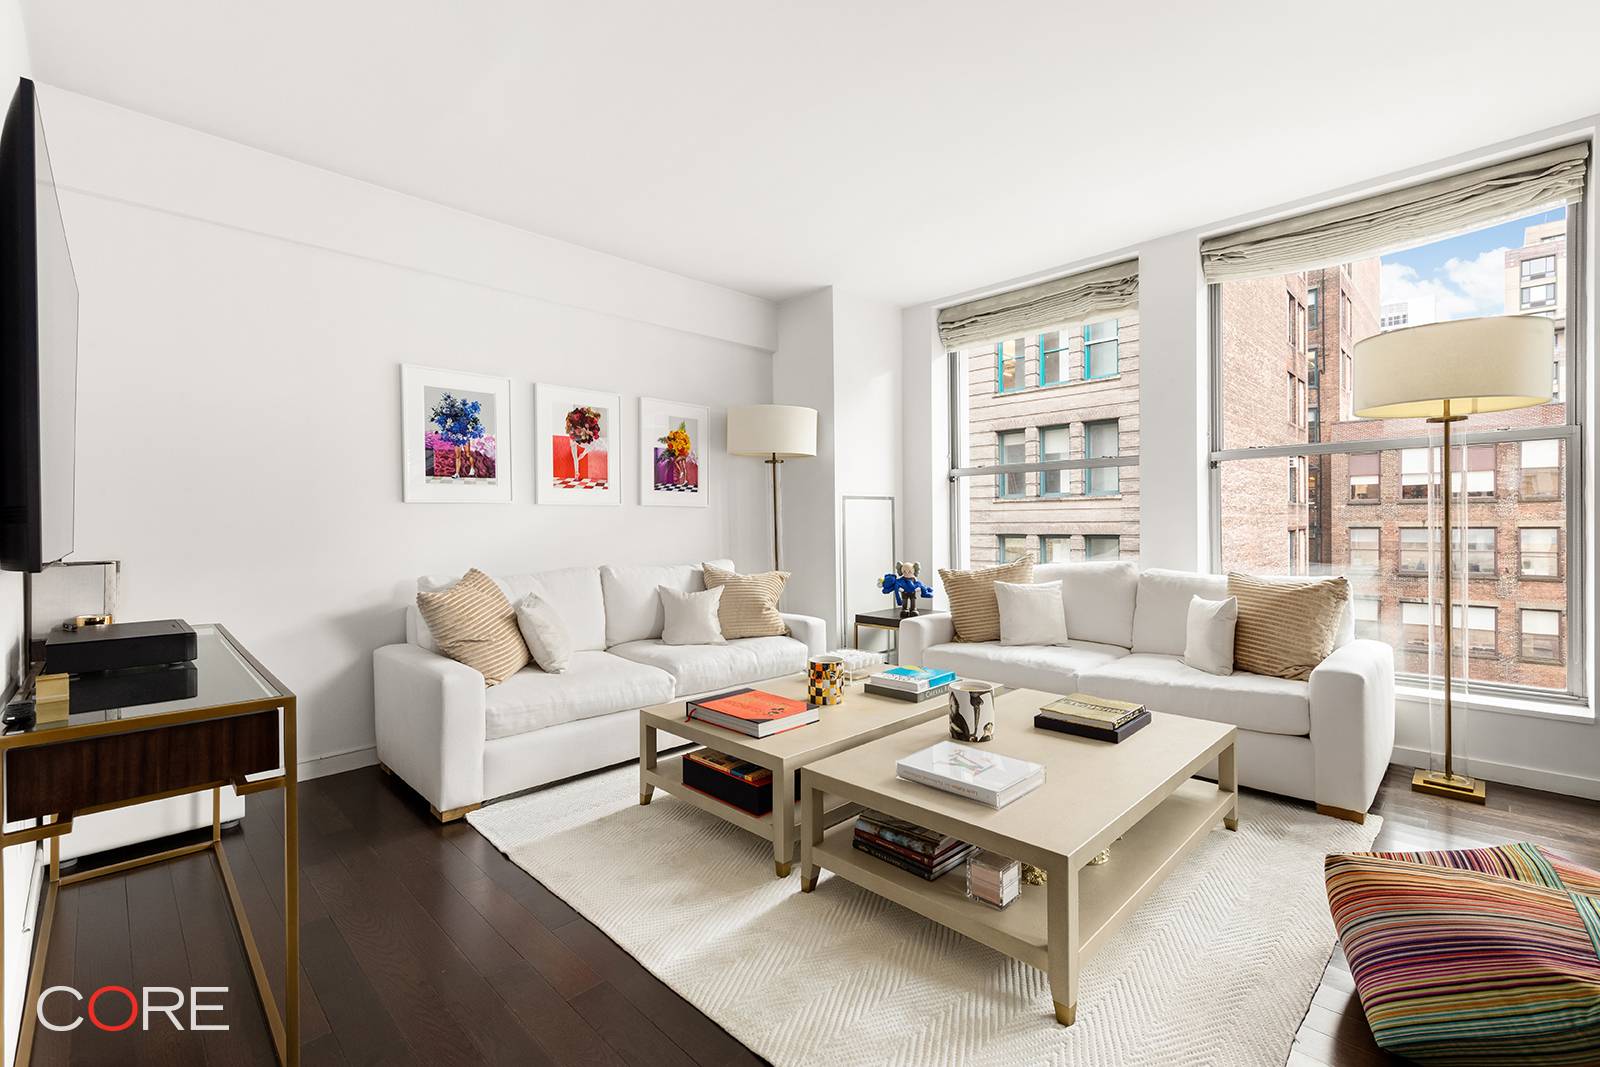 Immaculately designed with a modern aesthetic, 27 West 19th Street, 9th Floor, boasts unobstructed light from oversized windows from three exposures, with two bedrooms, two bathrooms and high ceilings amongst ...